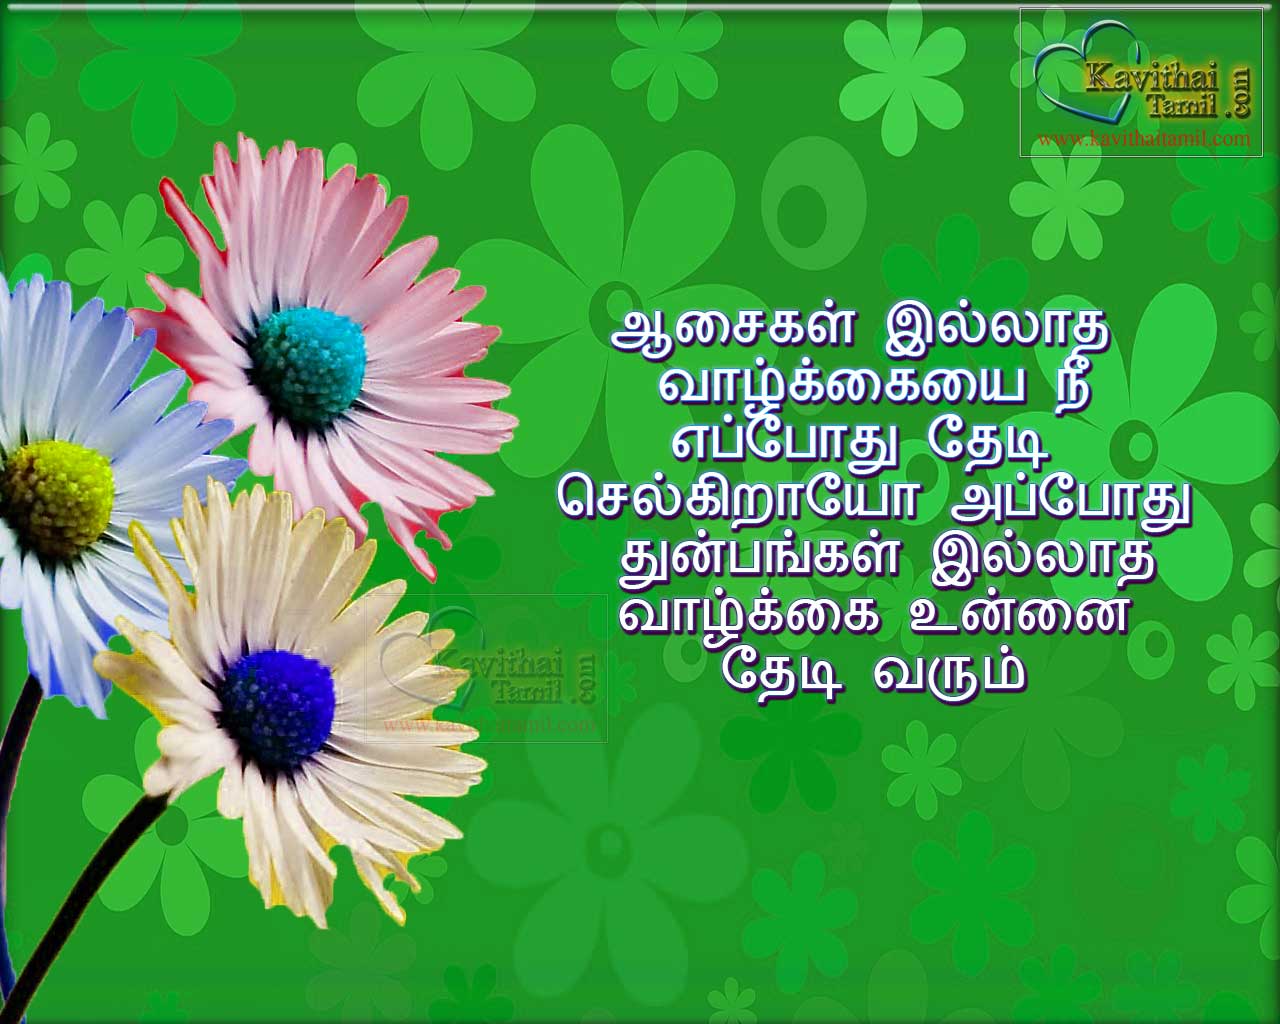 Tamil Kavithai Photos About Asaigal For Wishing Good Morning And Good Night